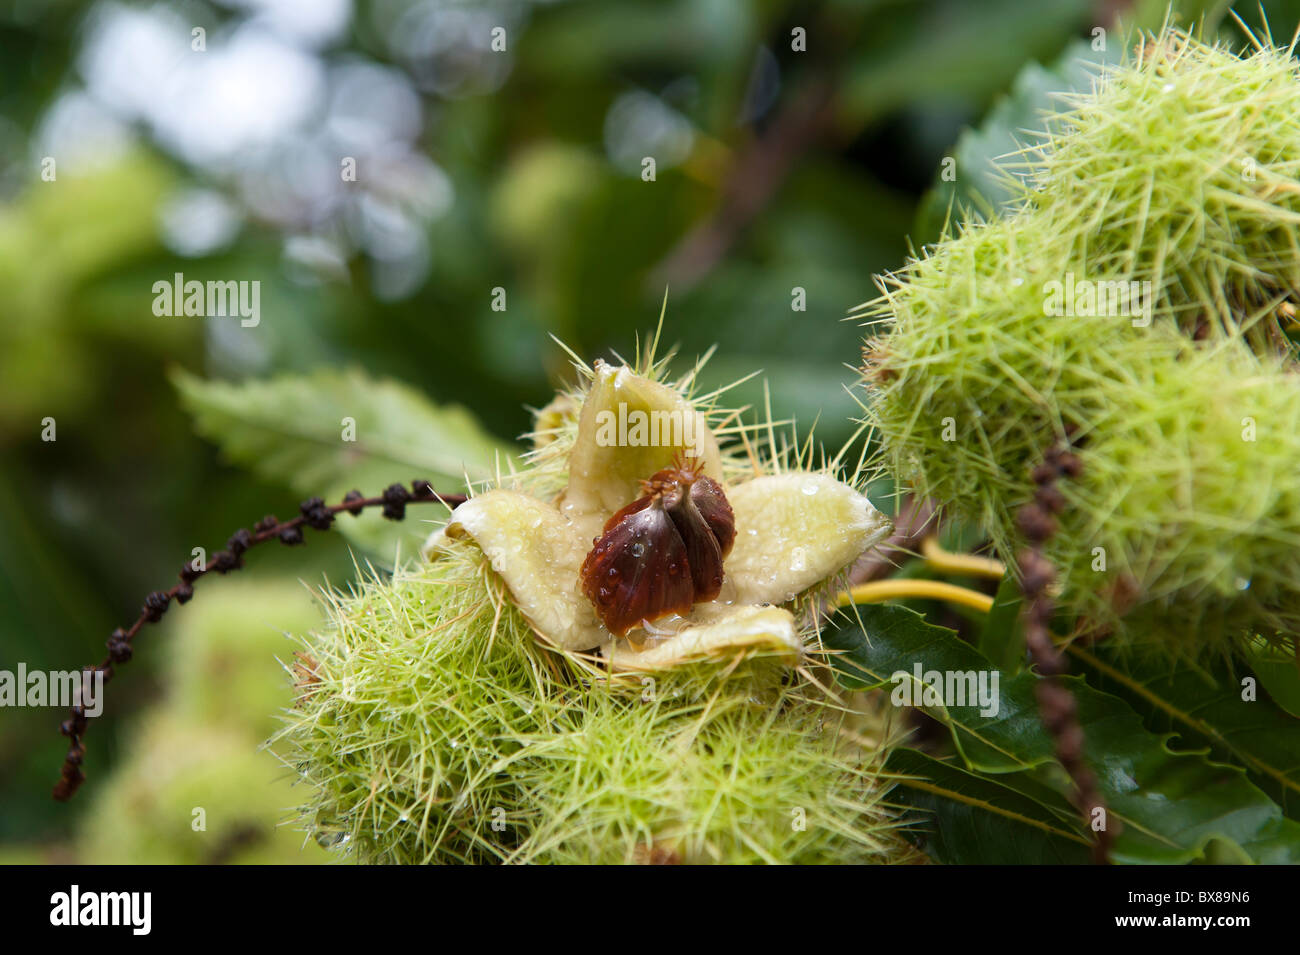 Sweet Chestnut (Castanea Sativa) seed nuts on the tree in autumn. The chestnuts can be roasted and used in a variety of recipes, including stuffing. Stock Photo